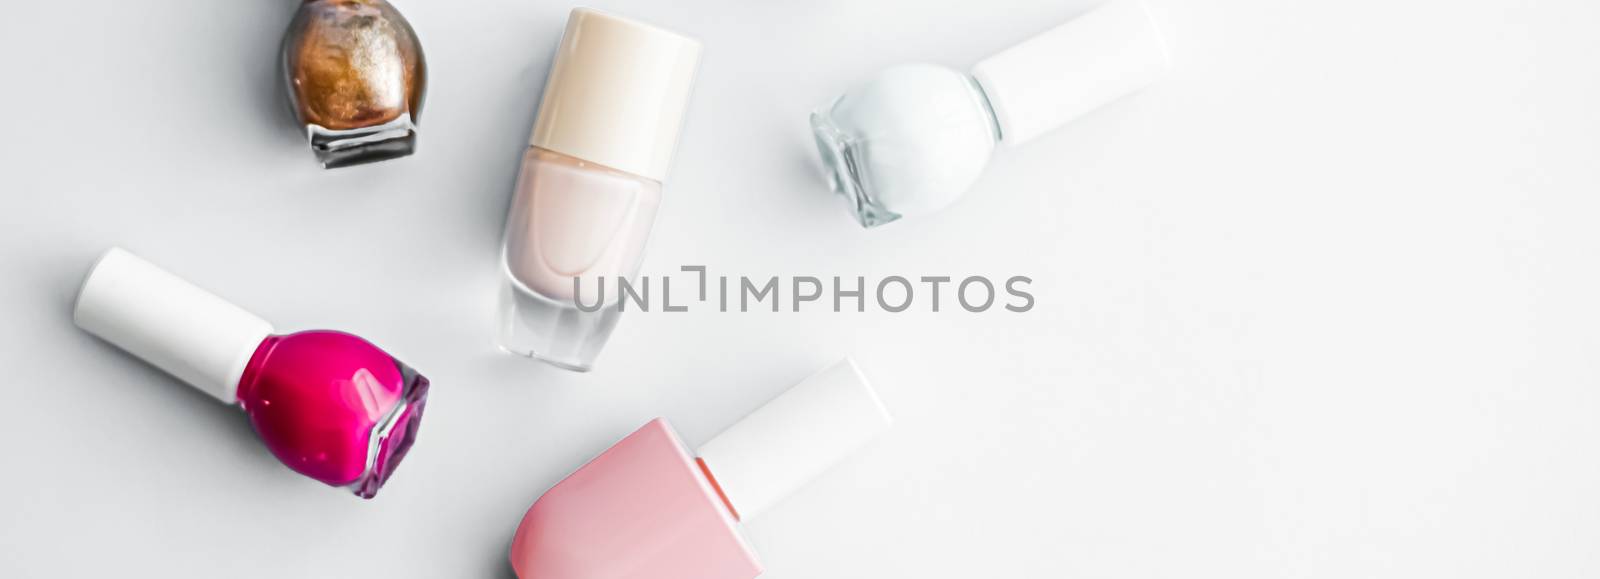 Nail polish bottles on white background, beauty brand by Anneleven